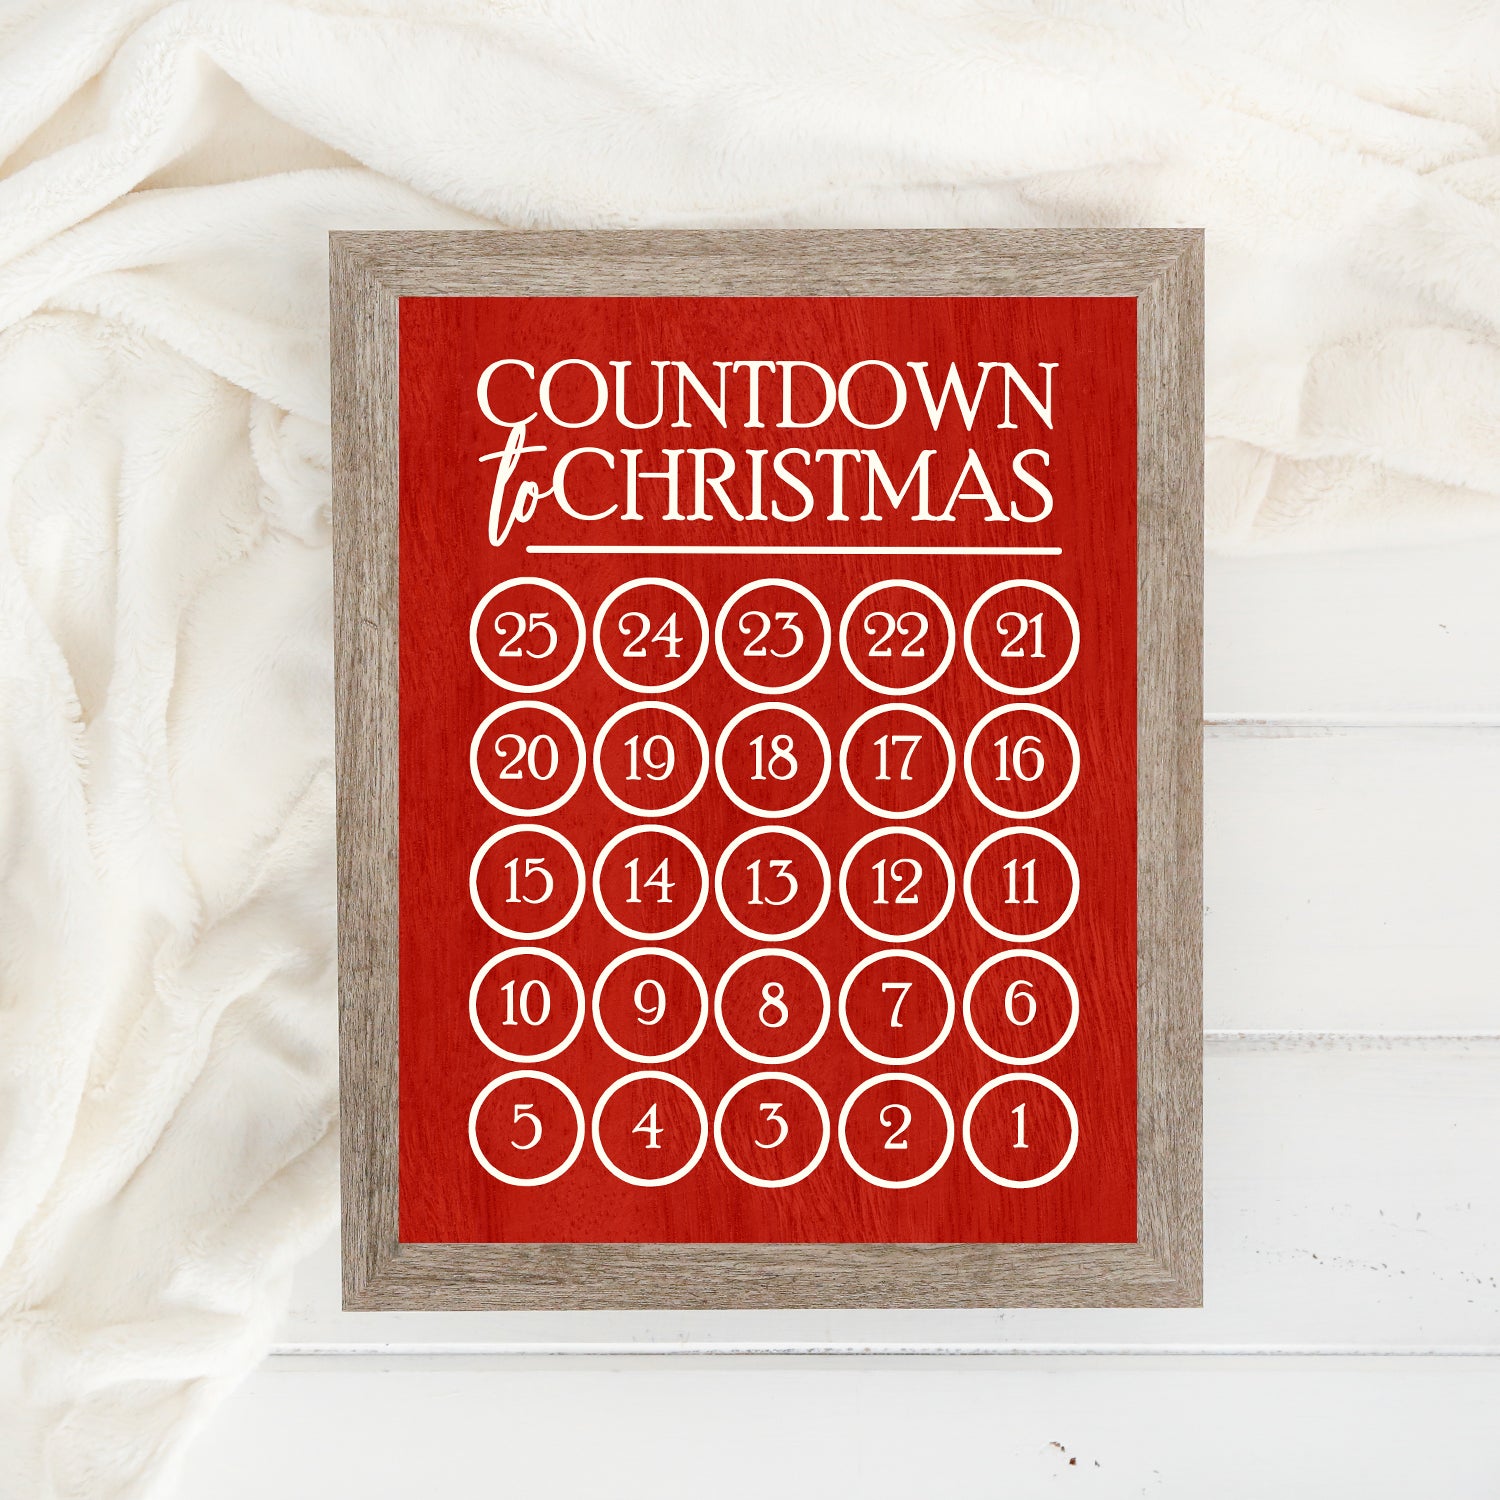 Additional Insert: Countdown to Christmas - Red